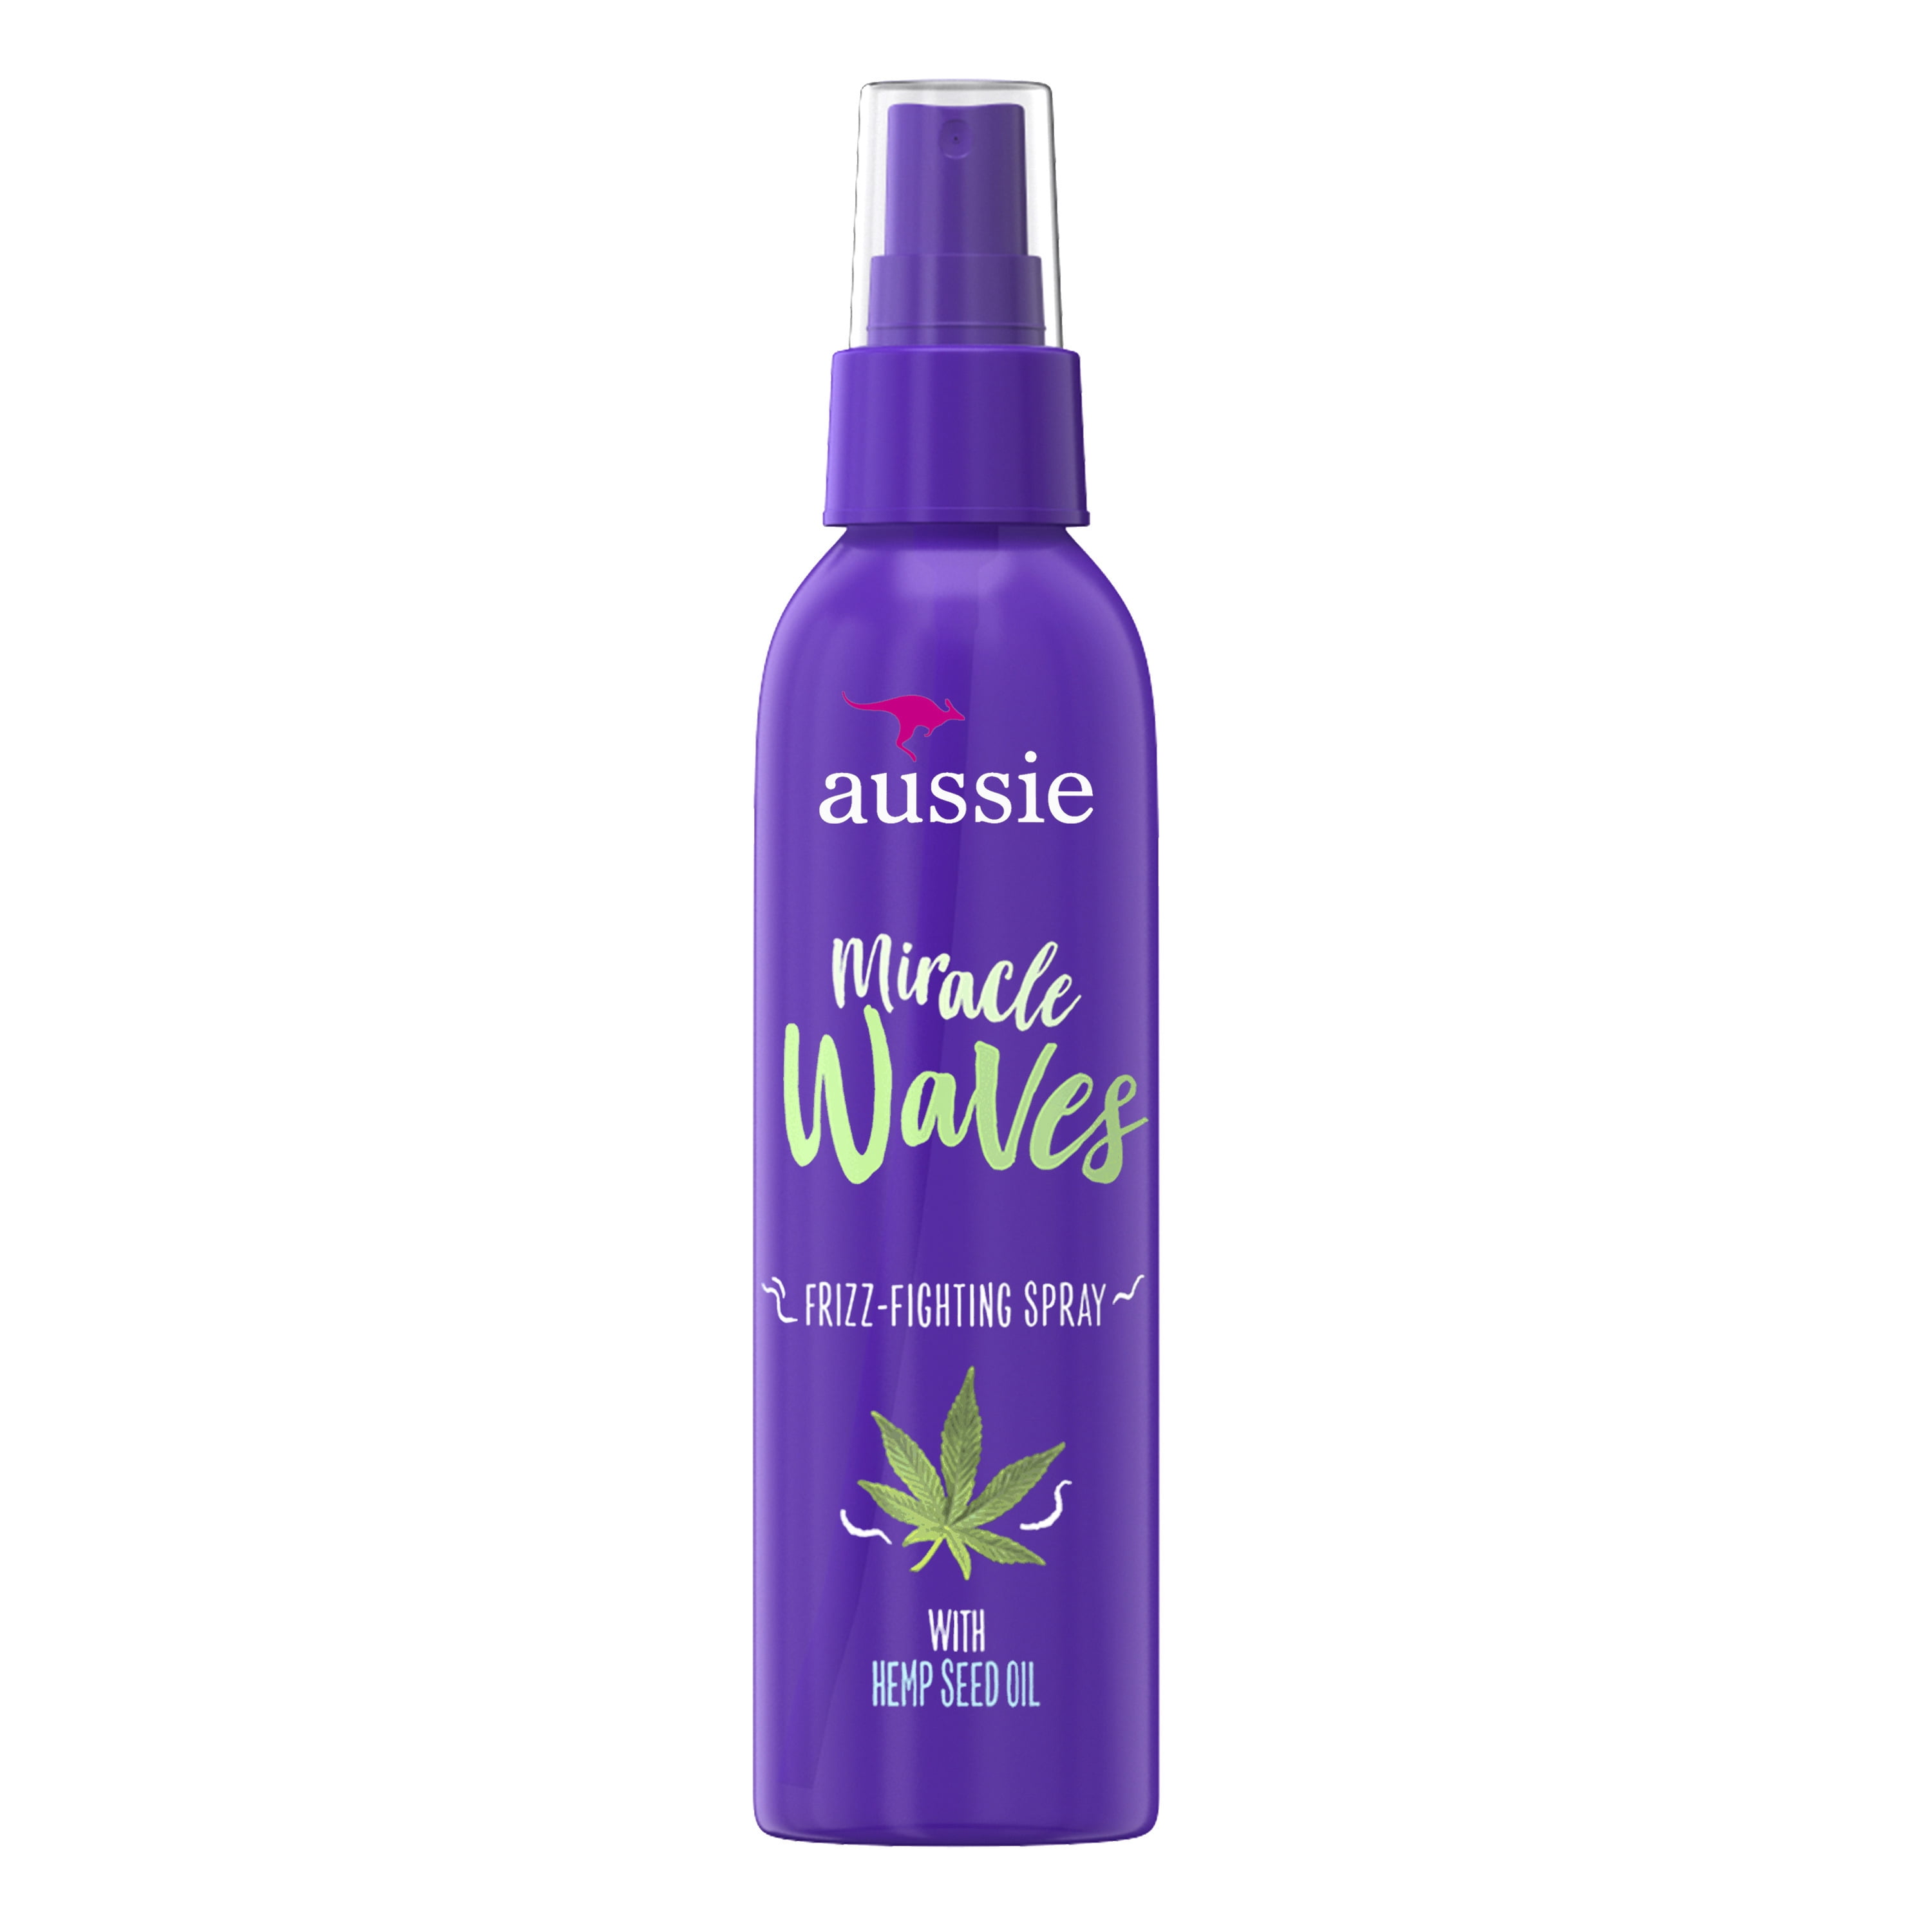 Aussie Miracle Waves Frizz-Fighting Spray with Hemp Seed Oil, Paraben Free, Sulfate Free, 5.7 fl. oz.